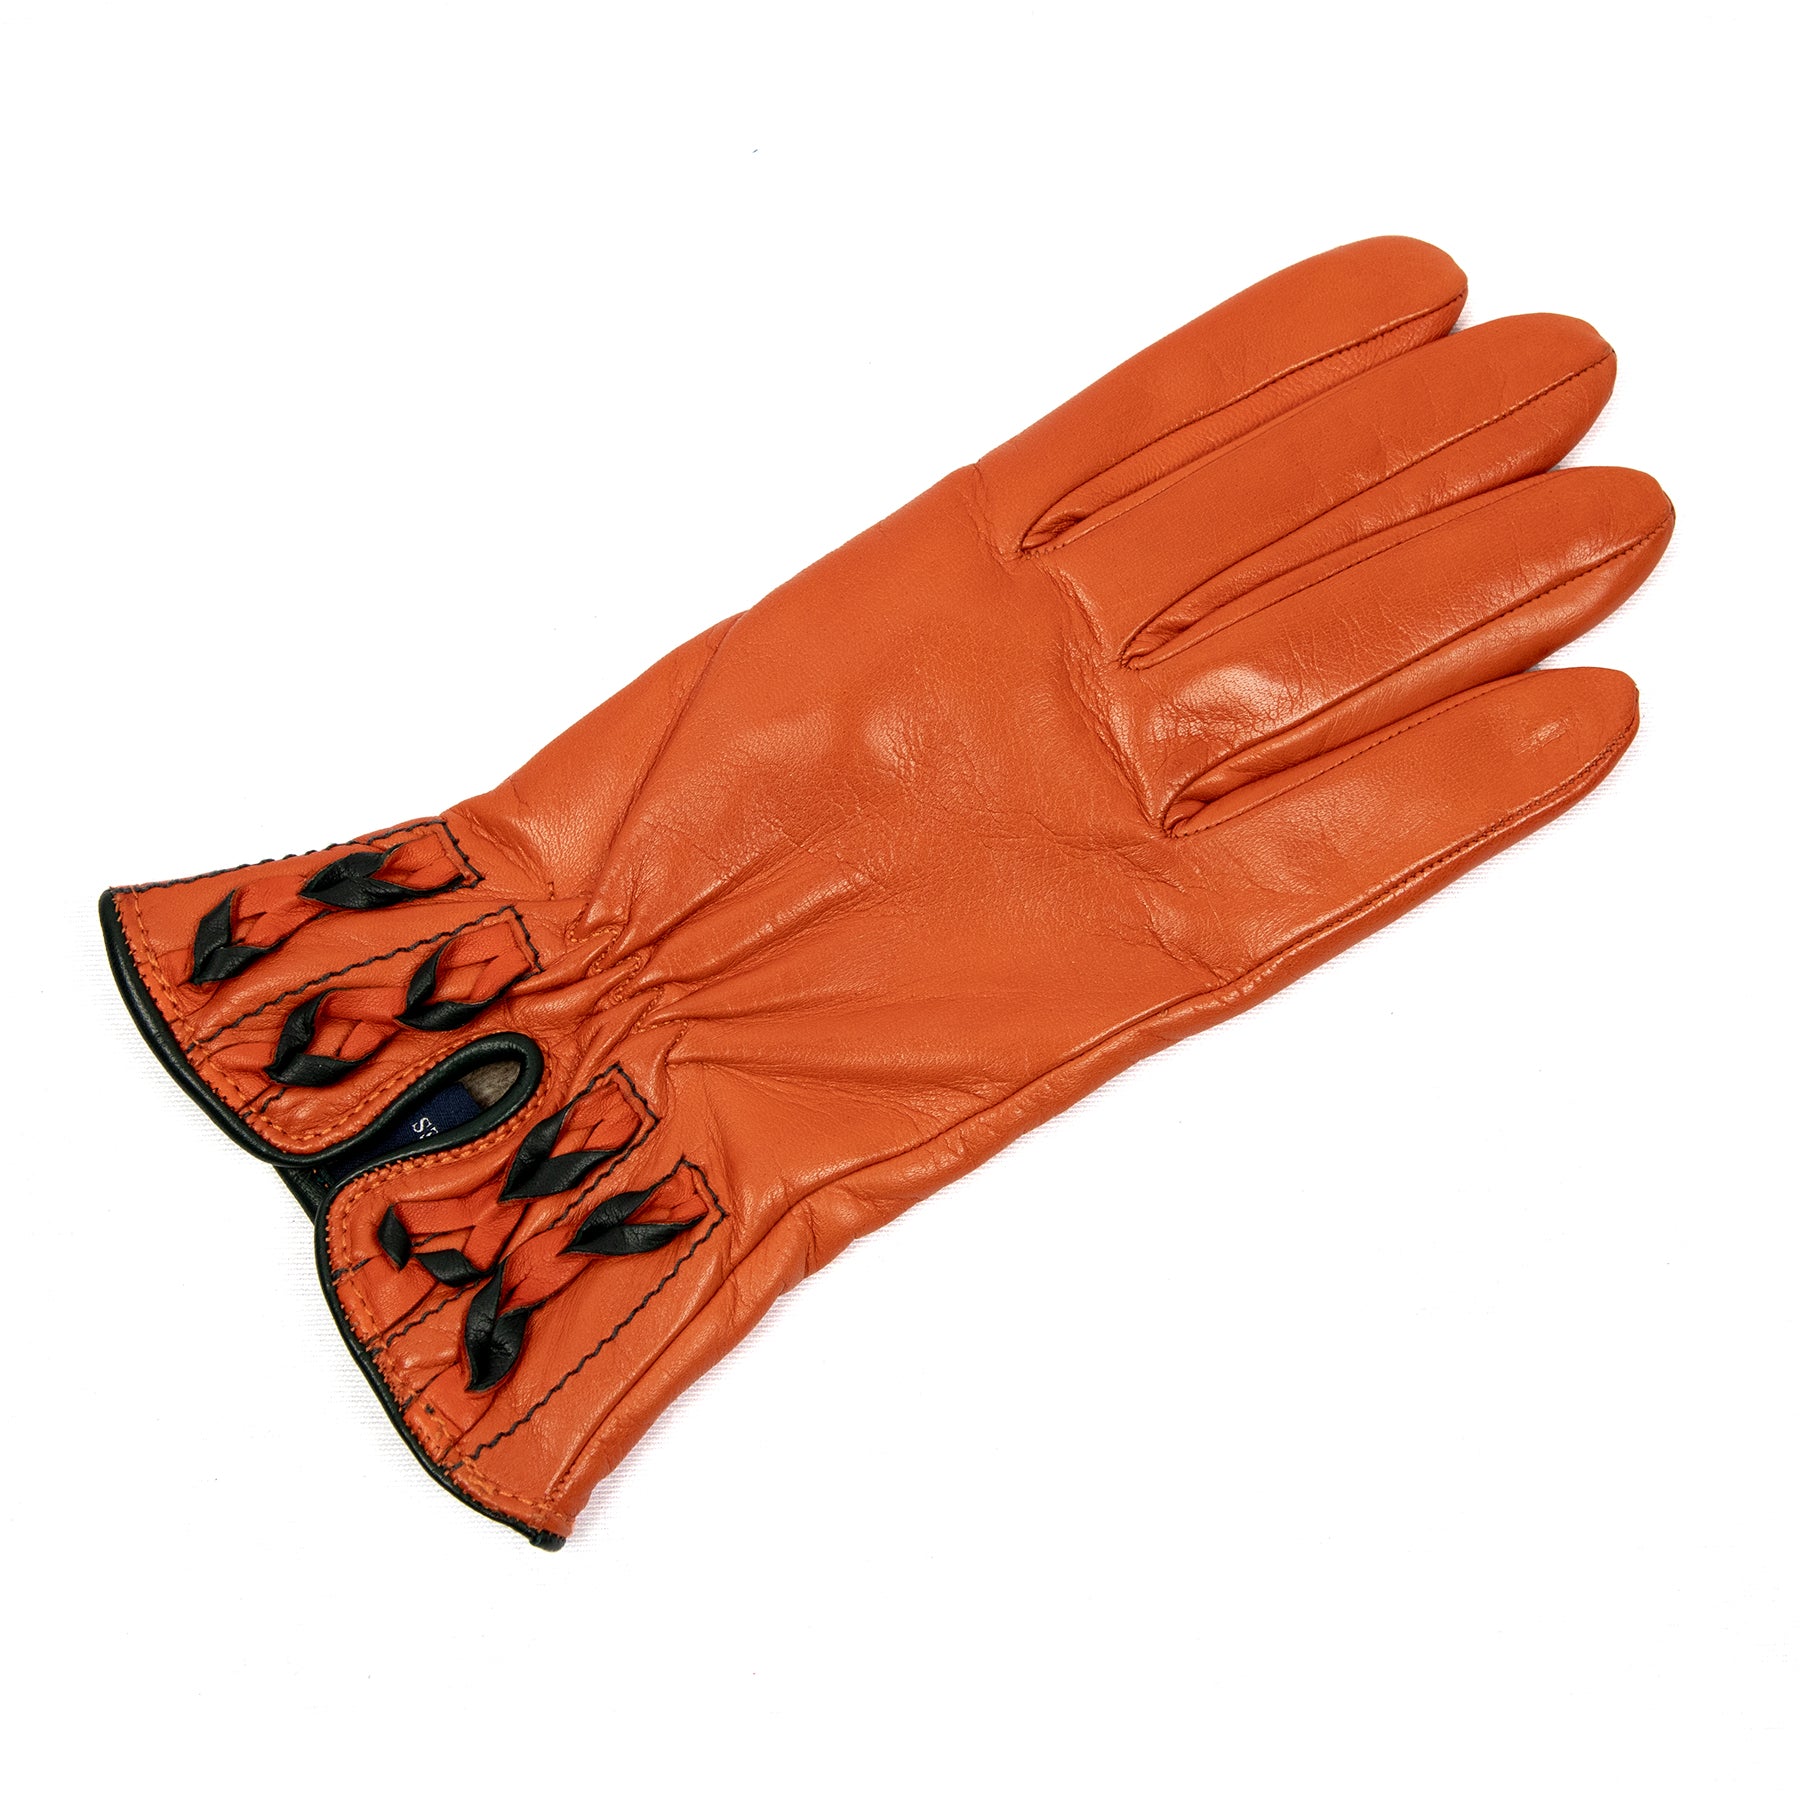 Woman's orange nappa leather gloves and bicolour braided cuff